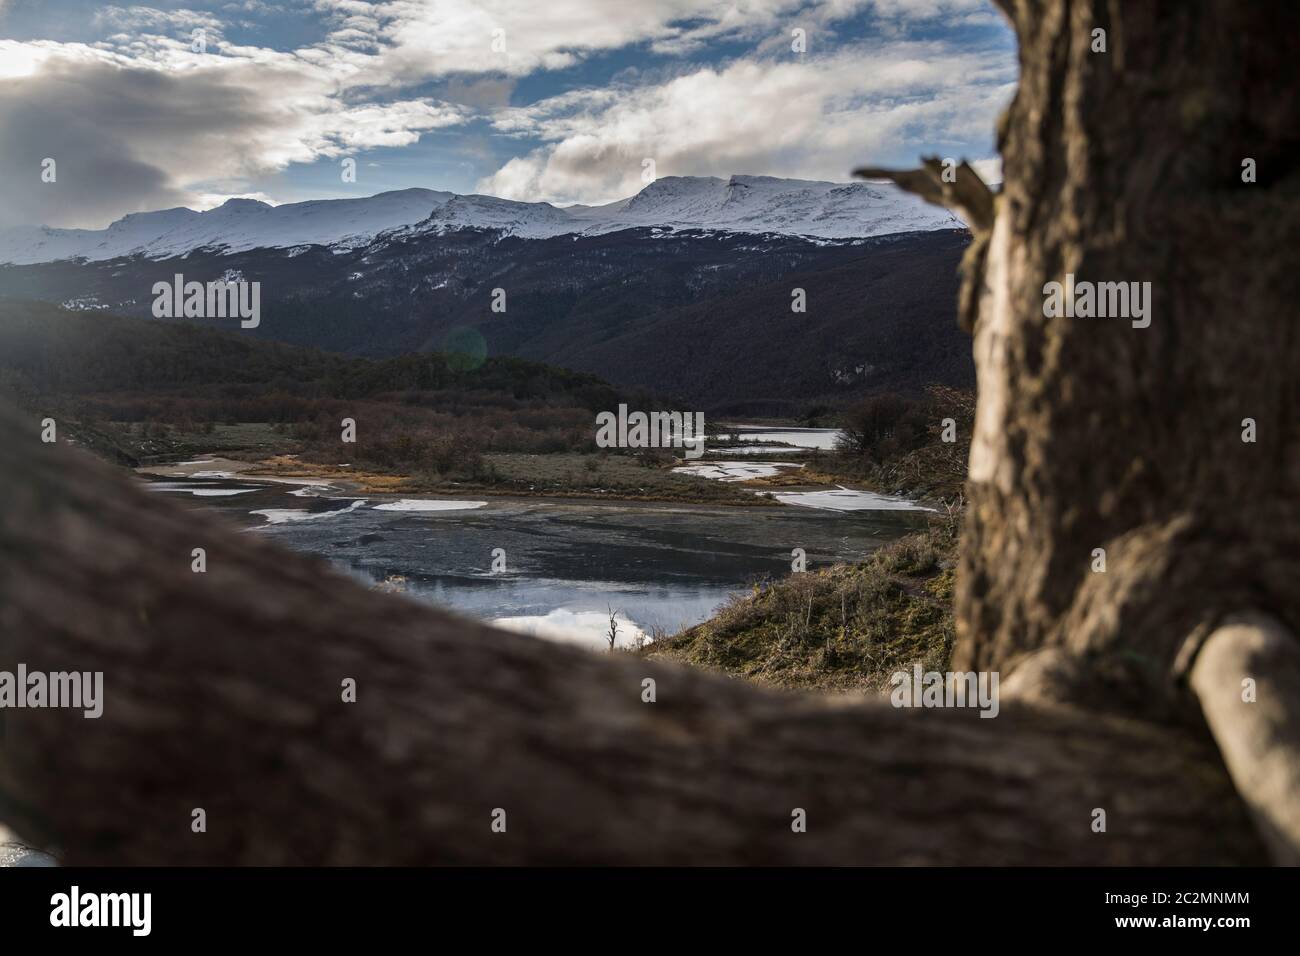 Landscape of a frozen lake and a mountain range in the background Stock Photo